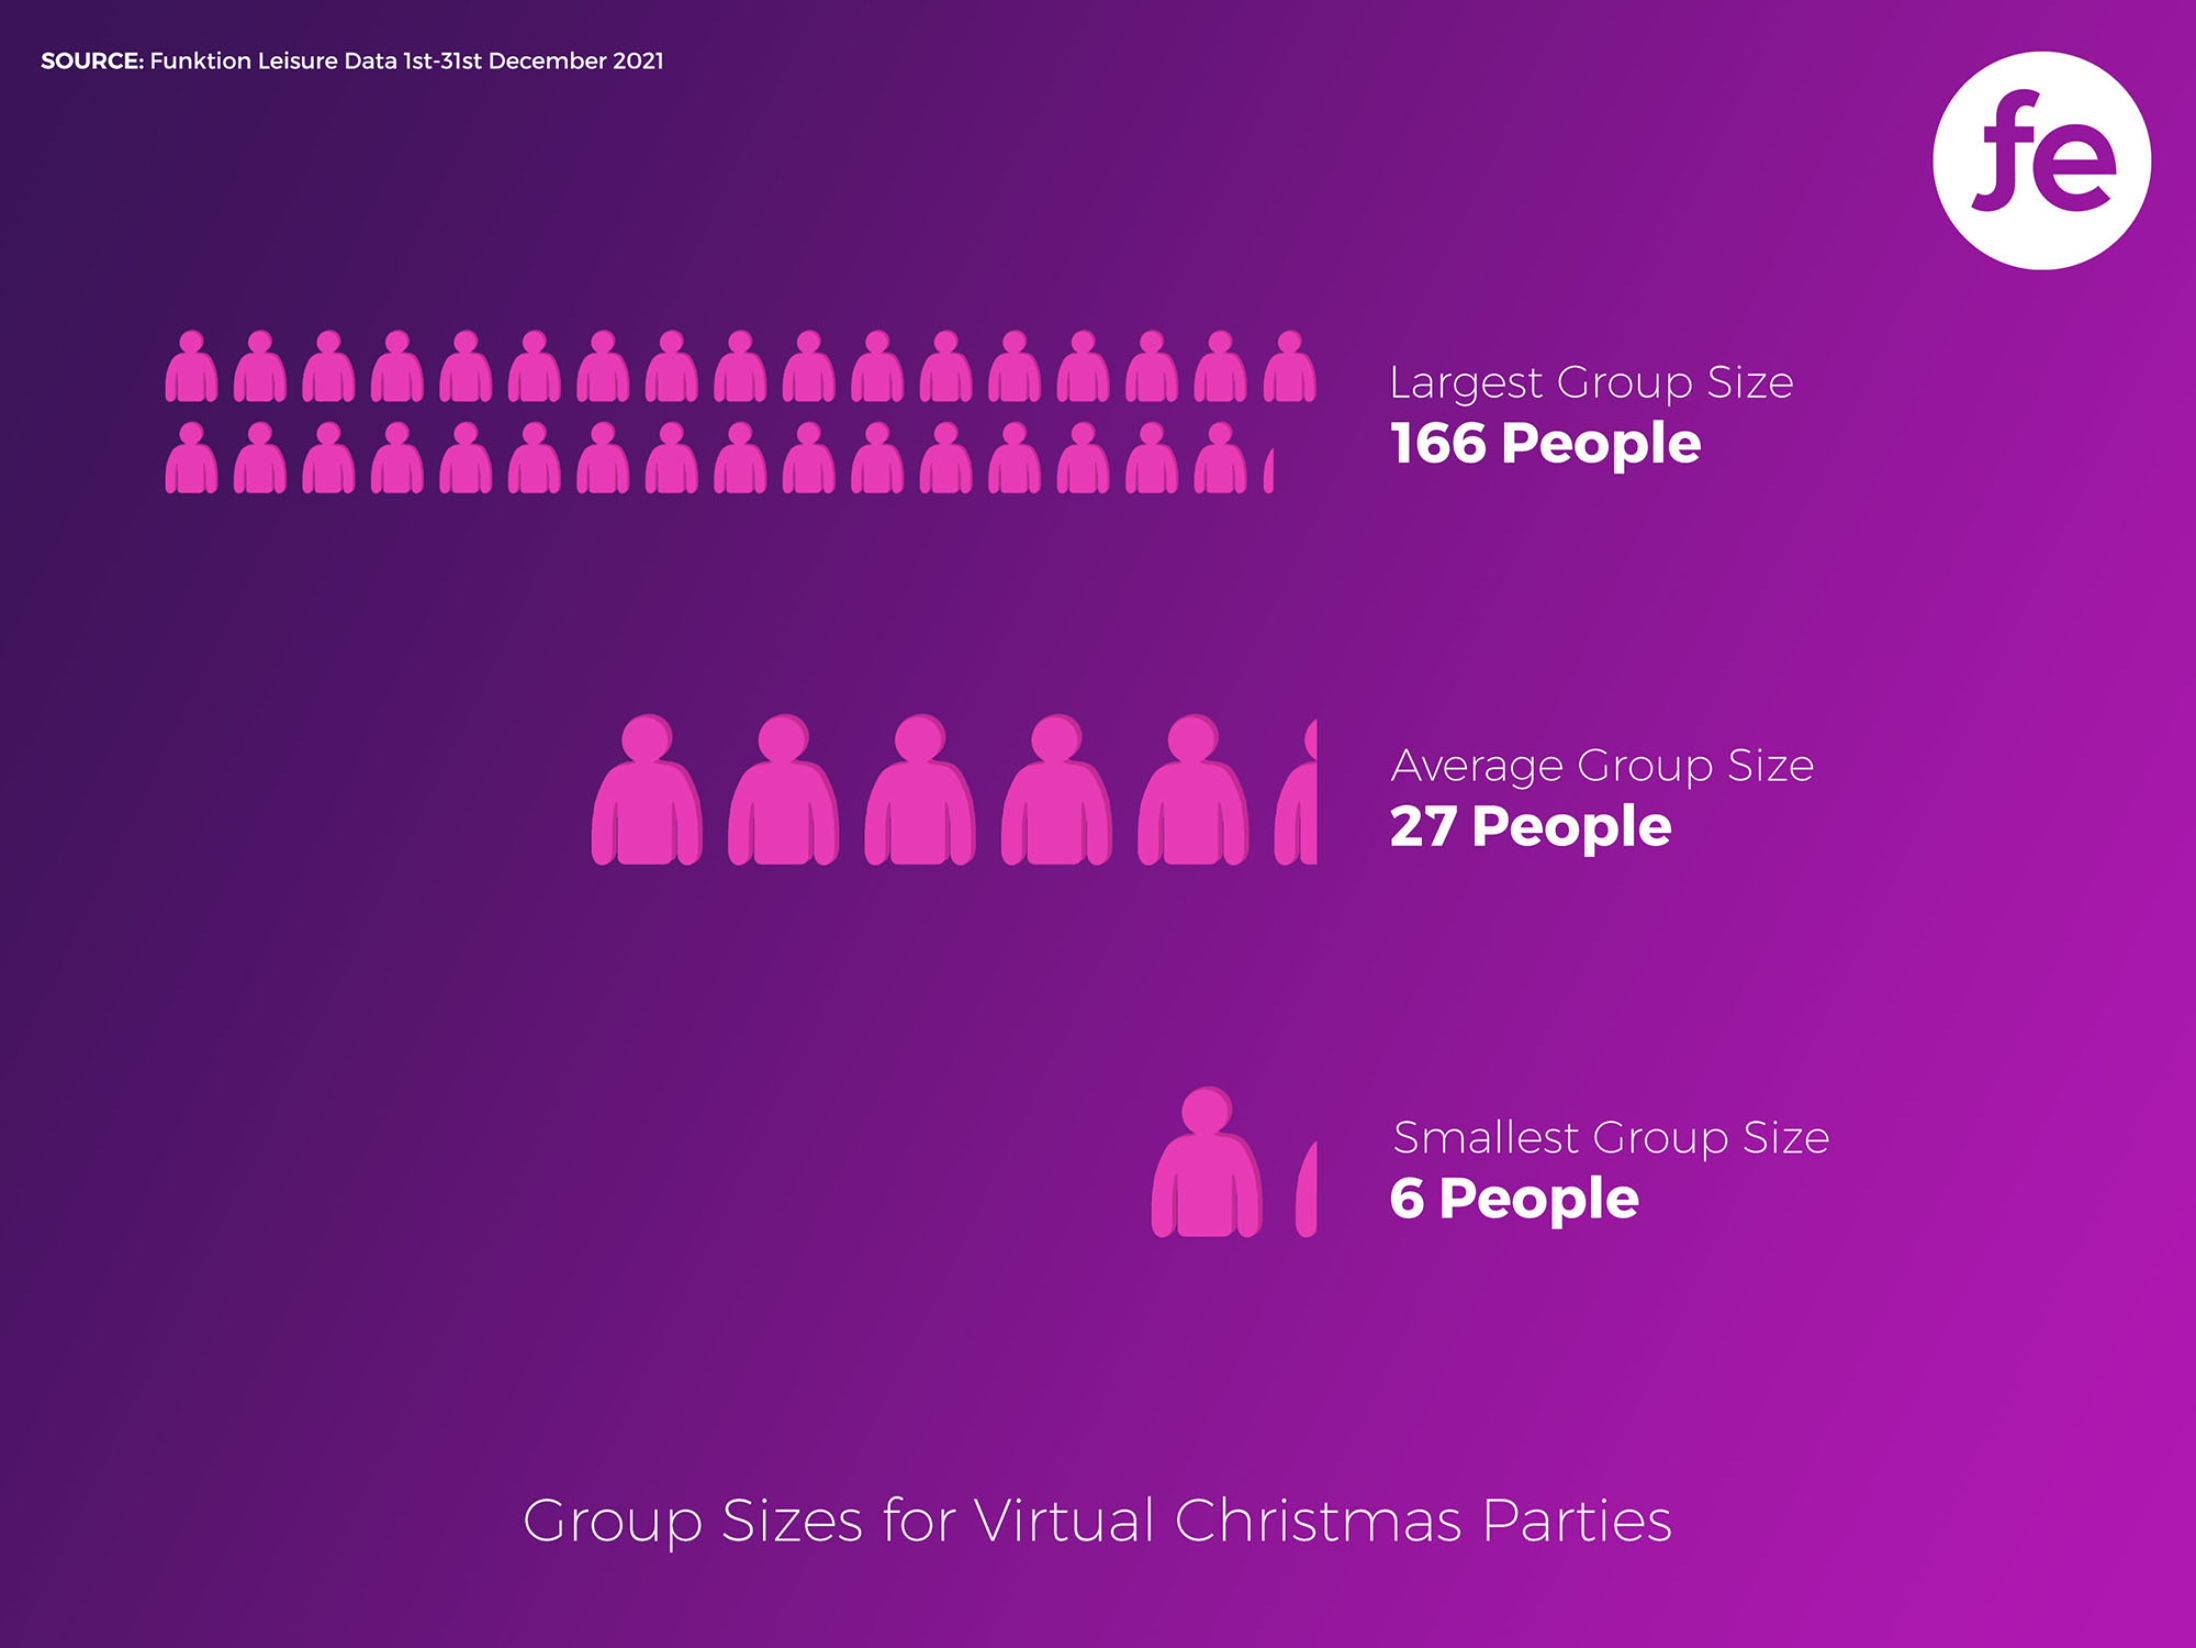 Group Sizes for Virtual Christmas Parties in 2021